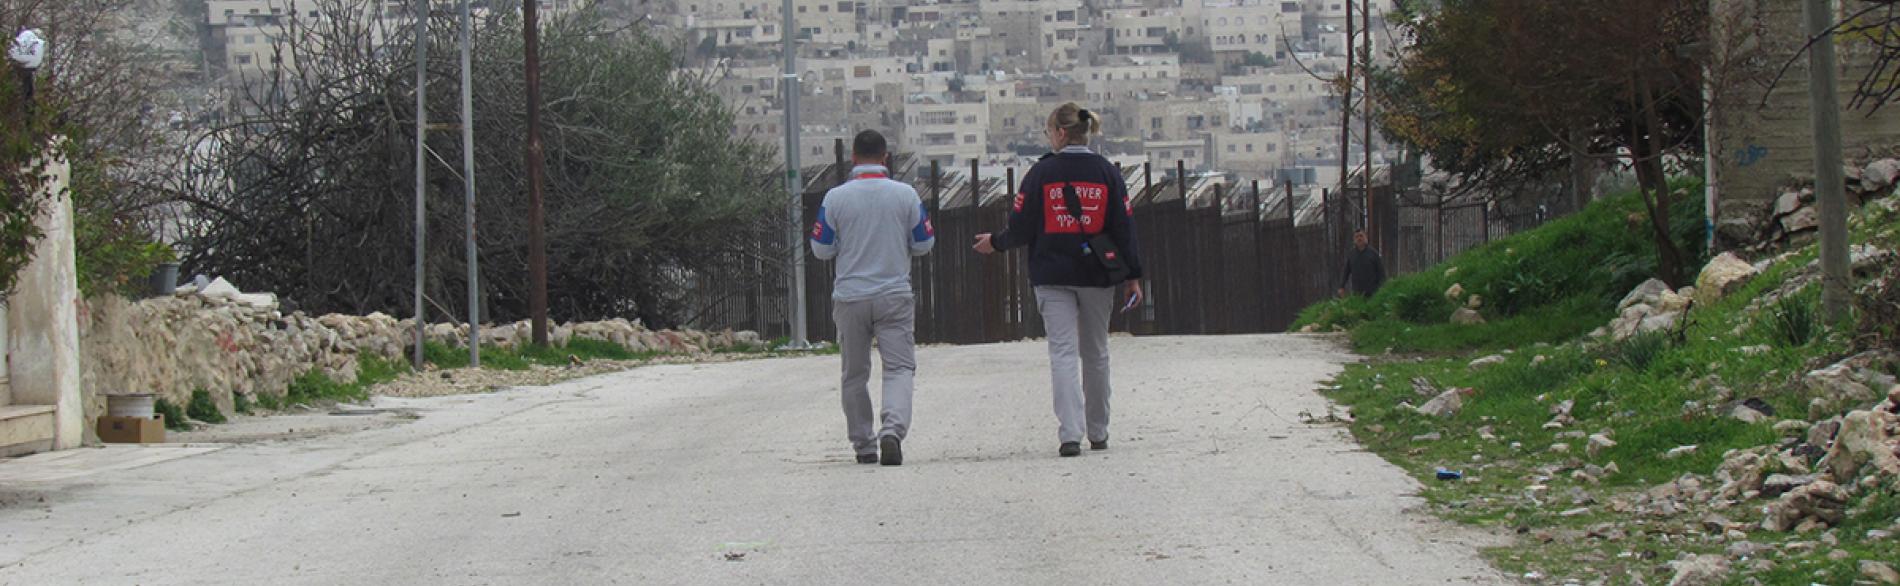 TIPH members patrolling the closed military area of Tel Rumedia, in H2 Hebron, 6 February, 2018. © Photo by OCHA.